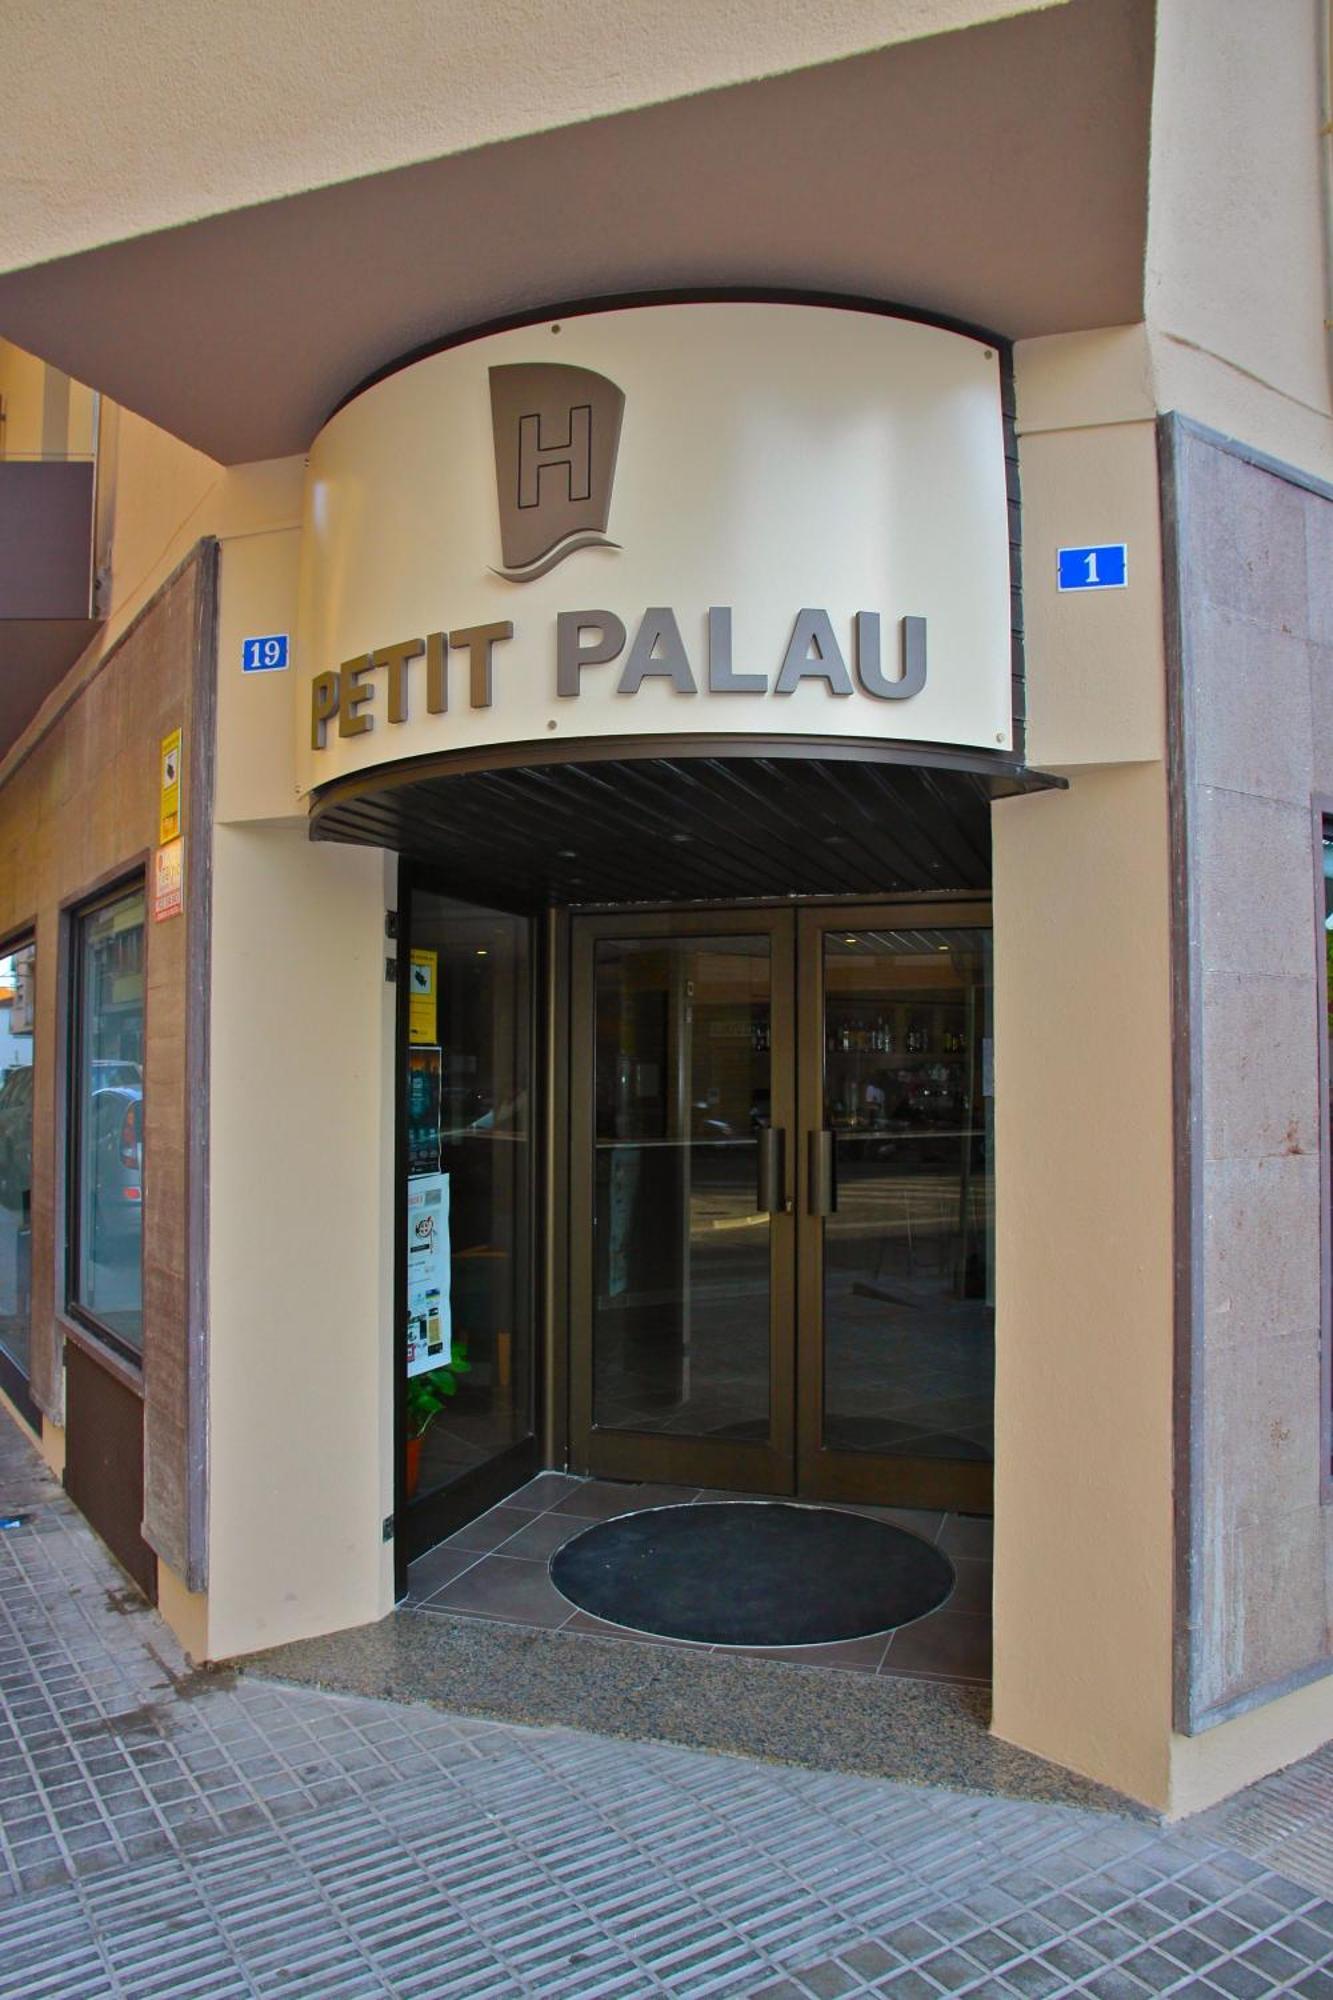 Petit Palau - Adults Only Hotel Blanes Buitenkant foto